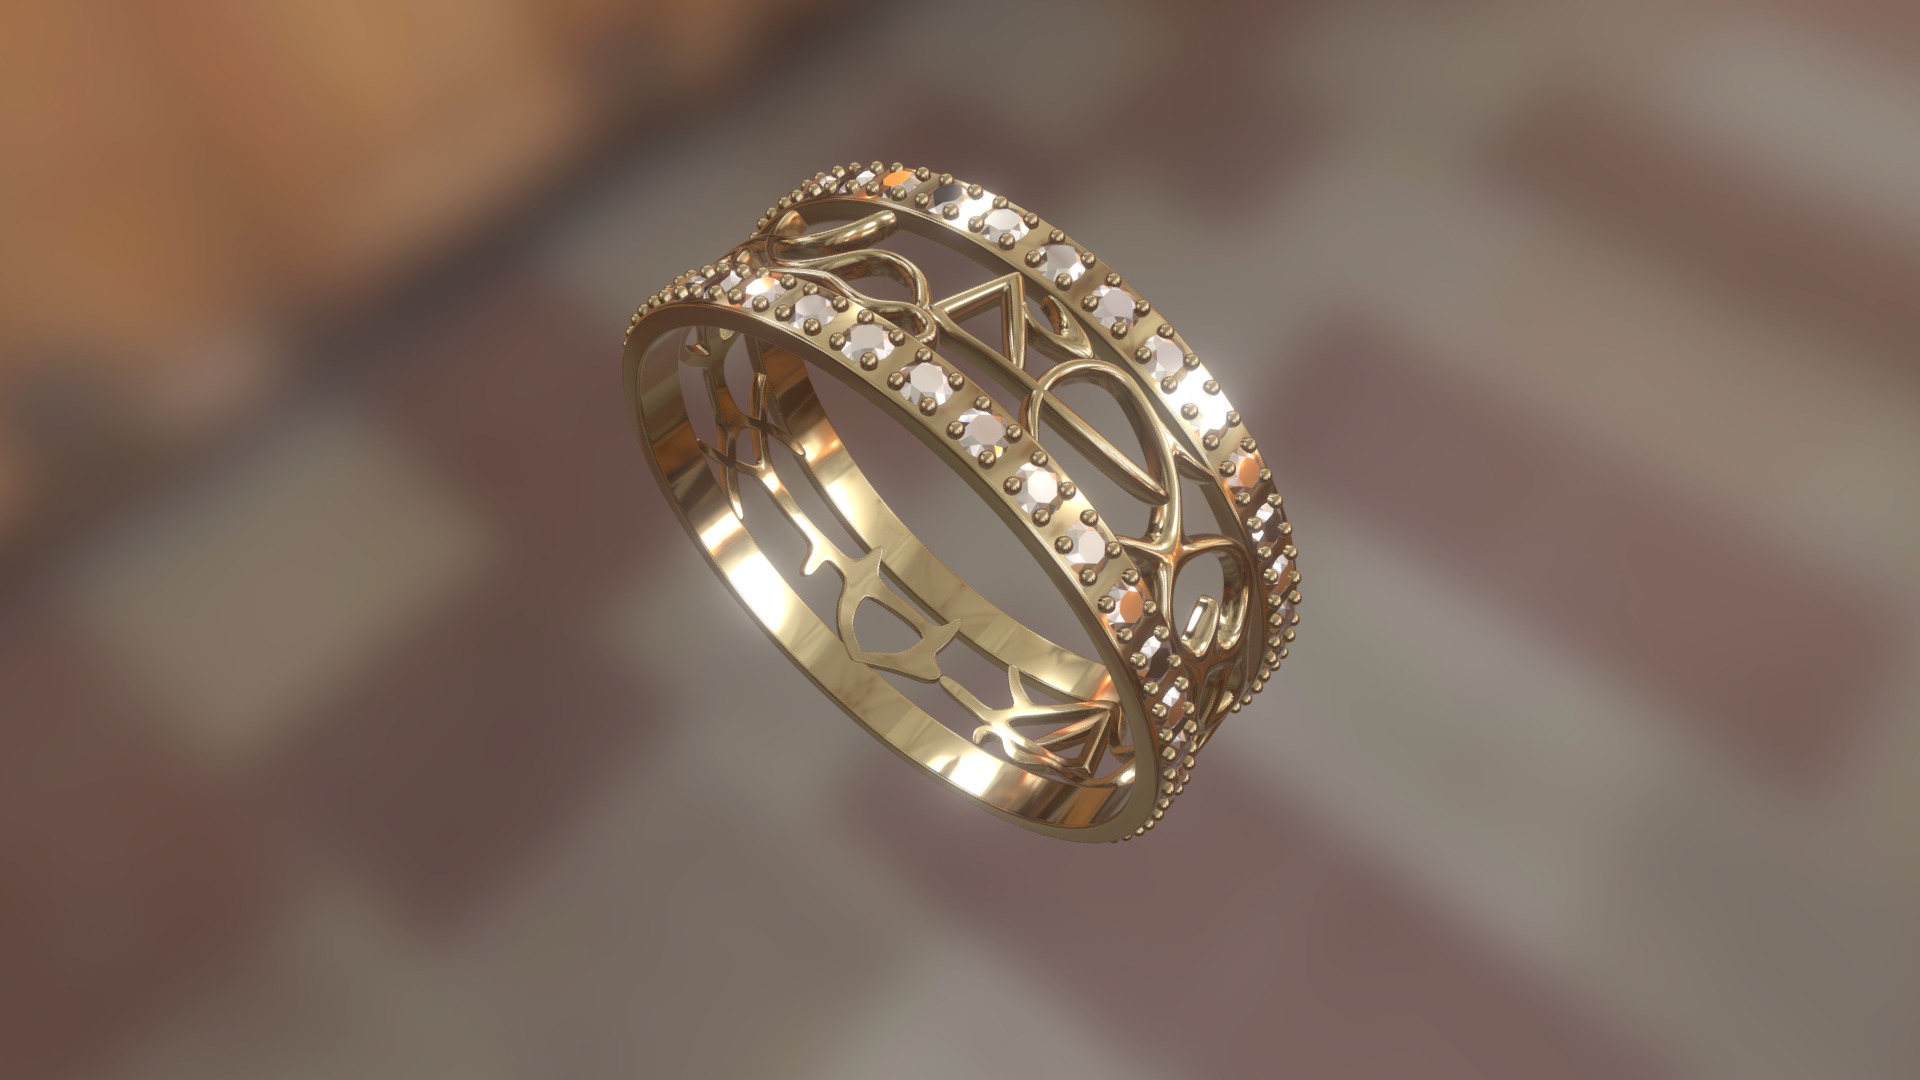 3D model 521 Jewelry – Ring Wild v.2 - This is a 3D model of the 521 Jewelry - Ring Wild v.2. The 3D model is about a gold and silver watch.